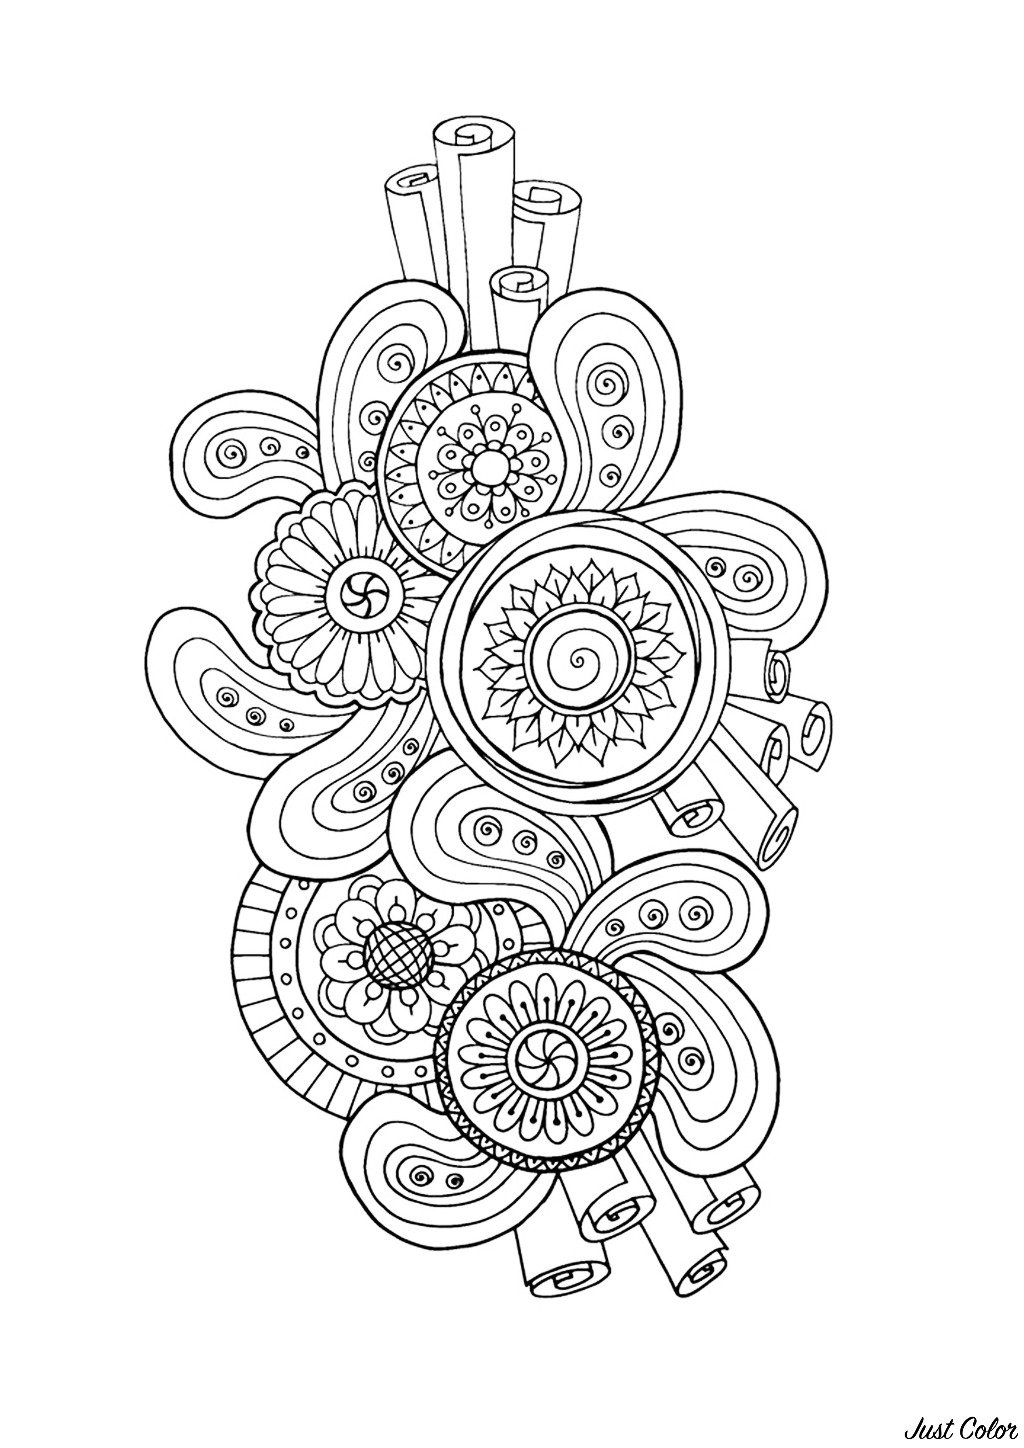 Zen & Anti-stress Coloring page : Abstract pattern inspired by flowers : n°3